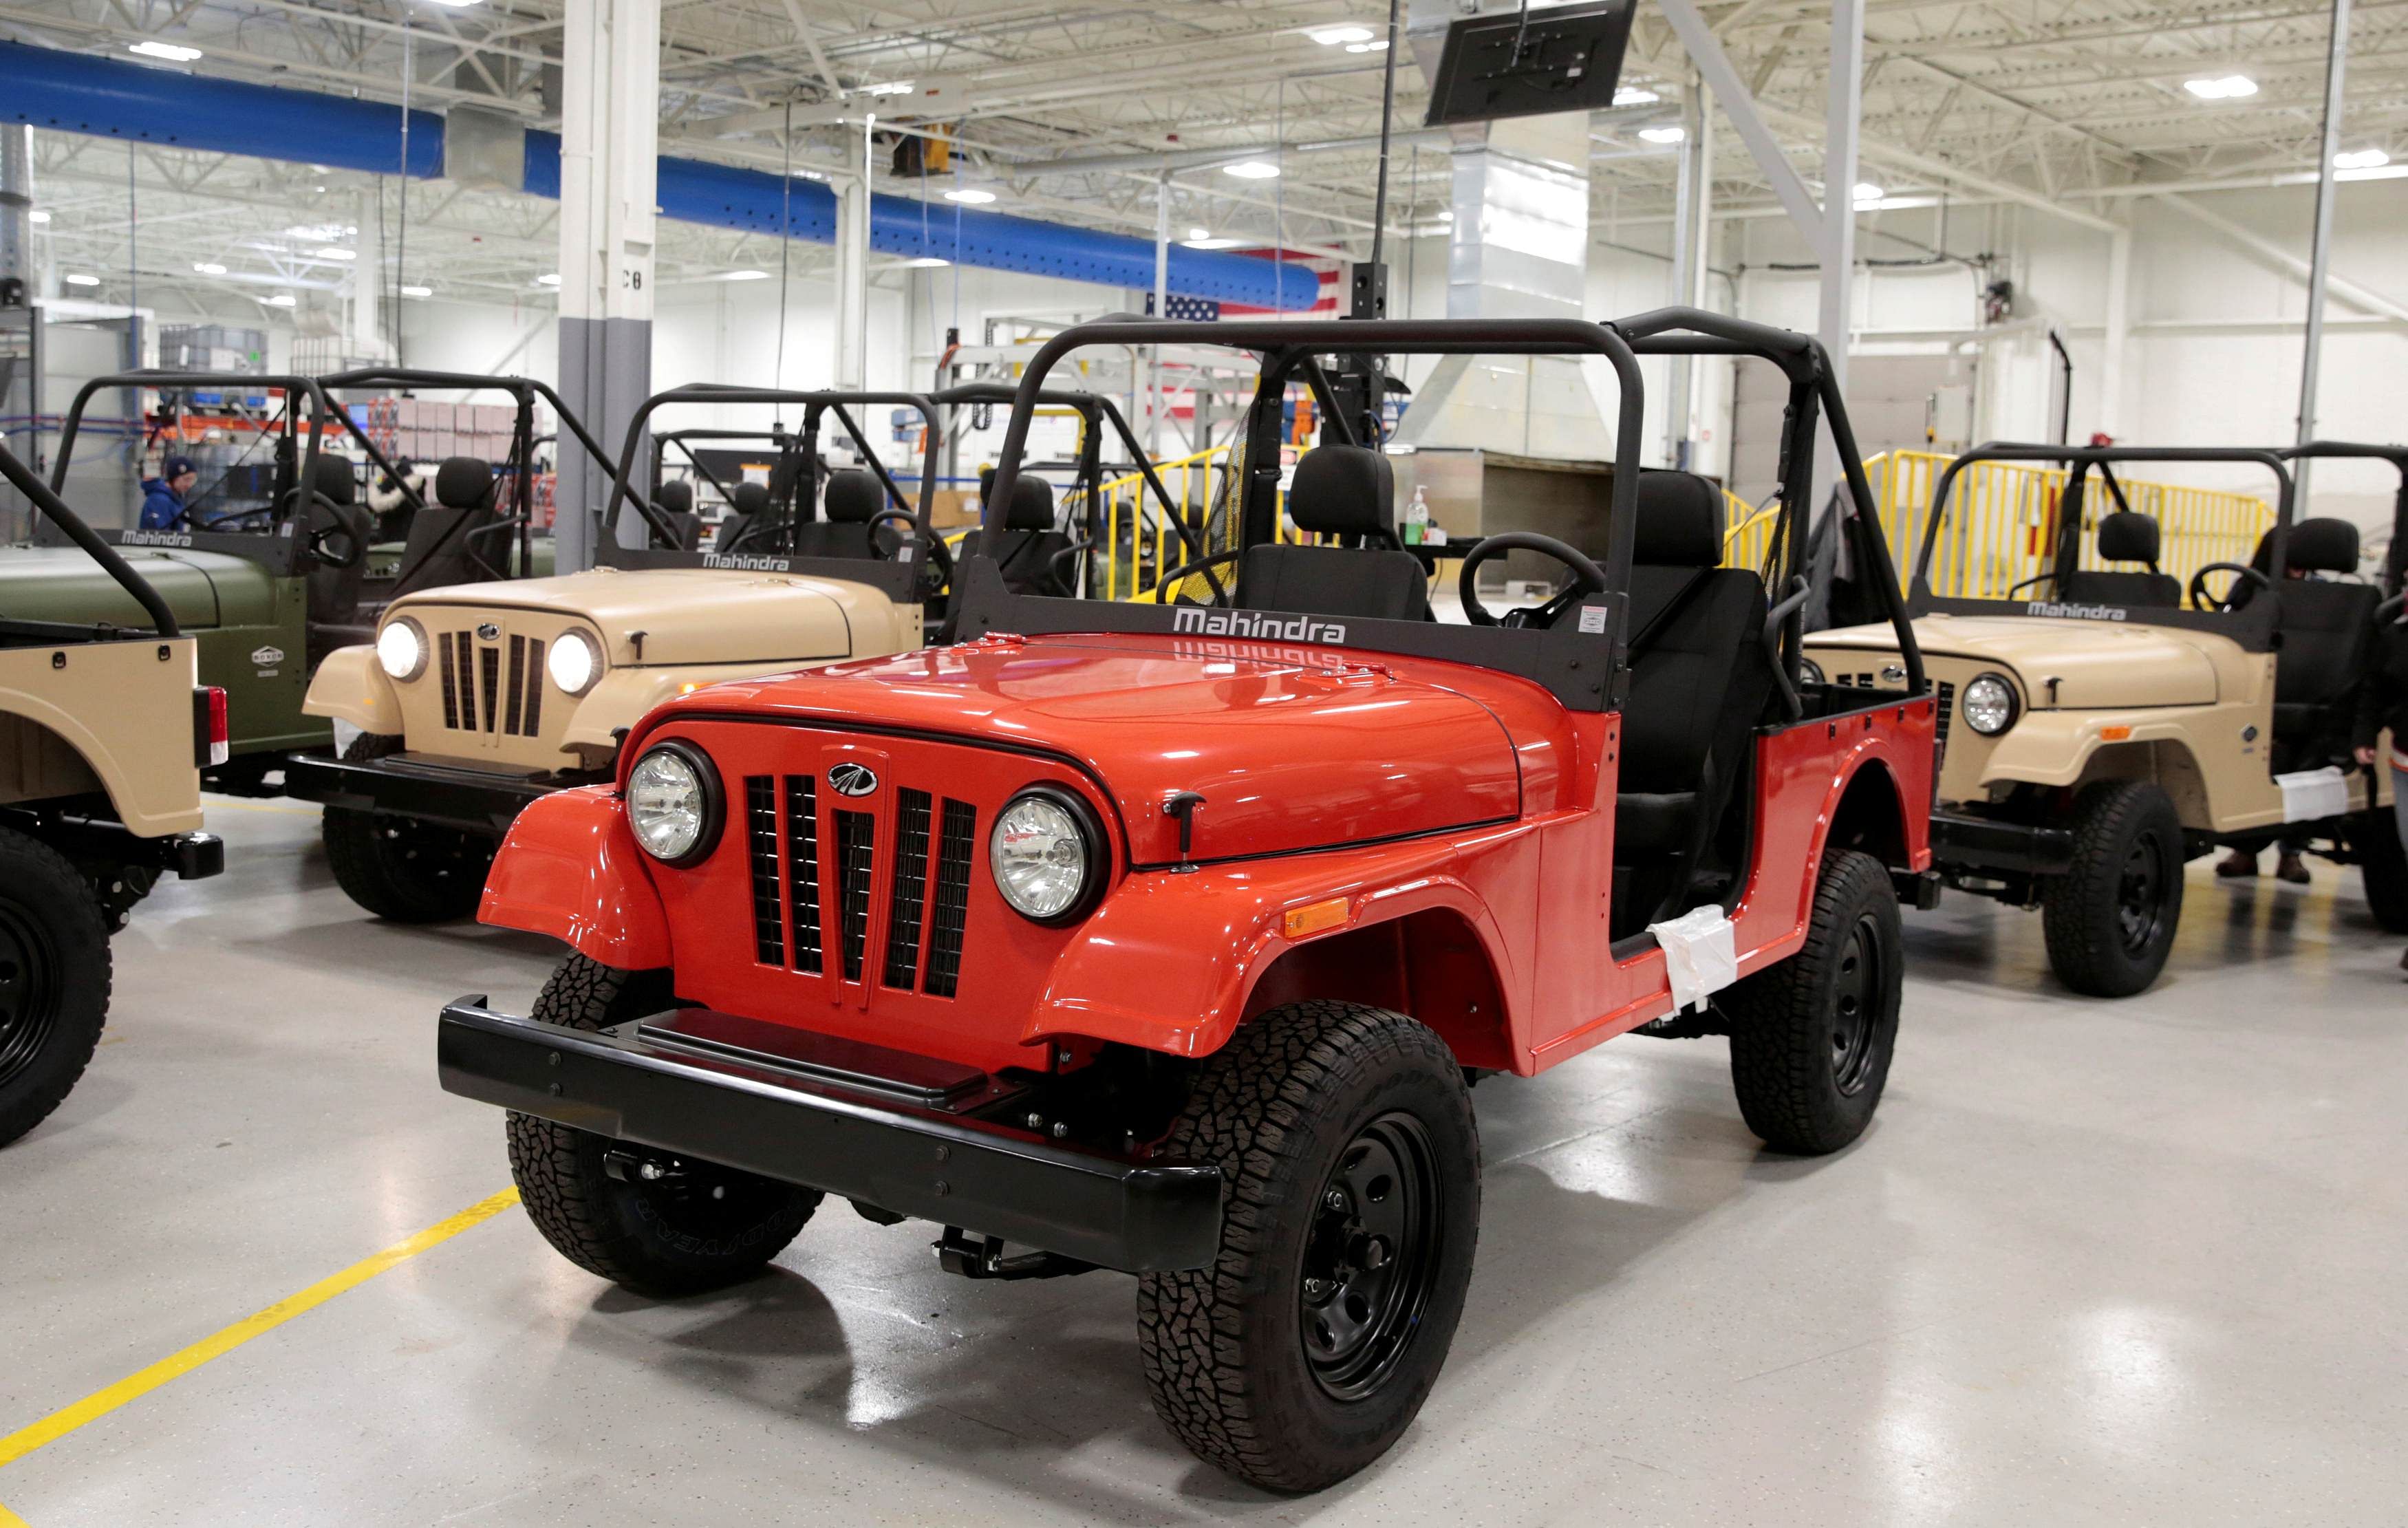 Fiat Chrysler claimed that the Roxor is a “nearly identical copy” of its Jeep, particularly the “boxy body shape with flat-appearing vertical sides and rear body ending at about the same height as the hood.” Credit: Reuters